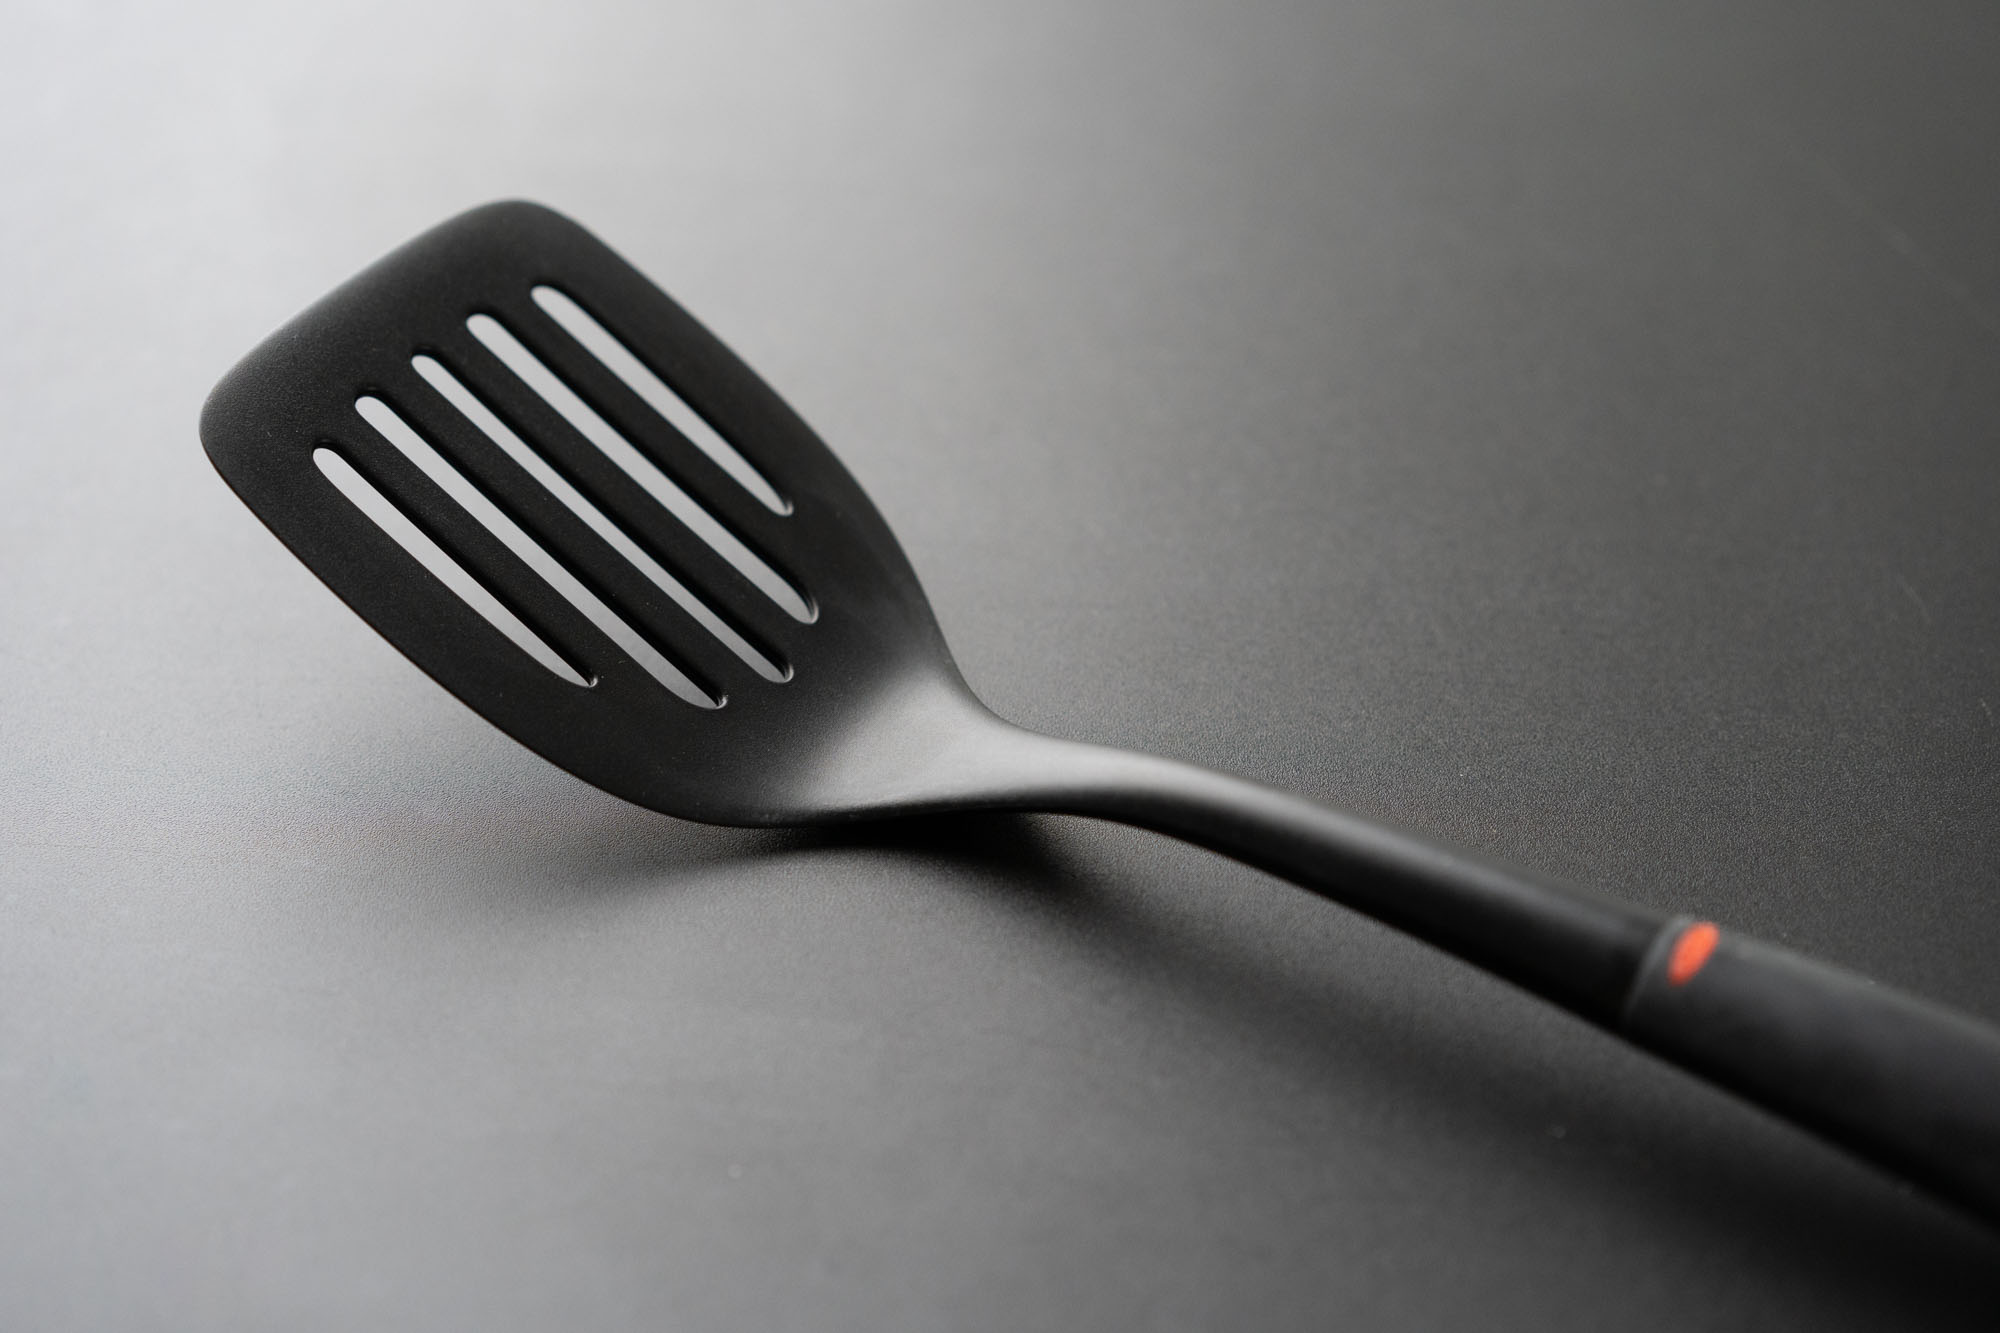 13 Safest, Non-Toxic Cooking Utensils For Your Kitchen - Hungry Huy